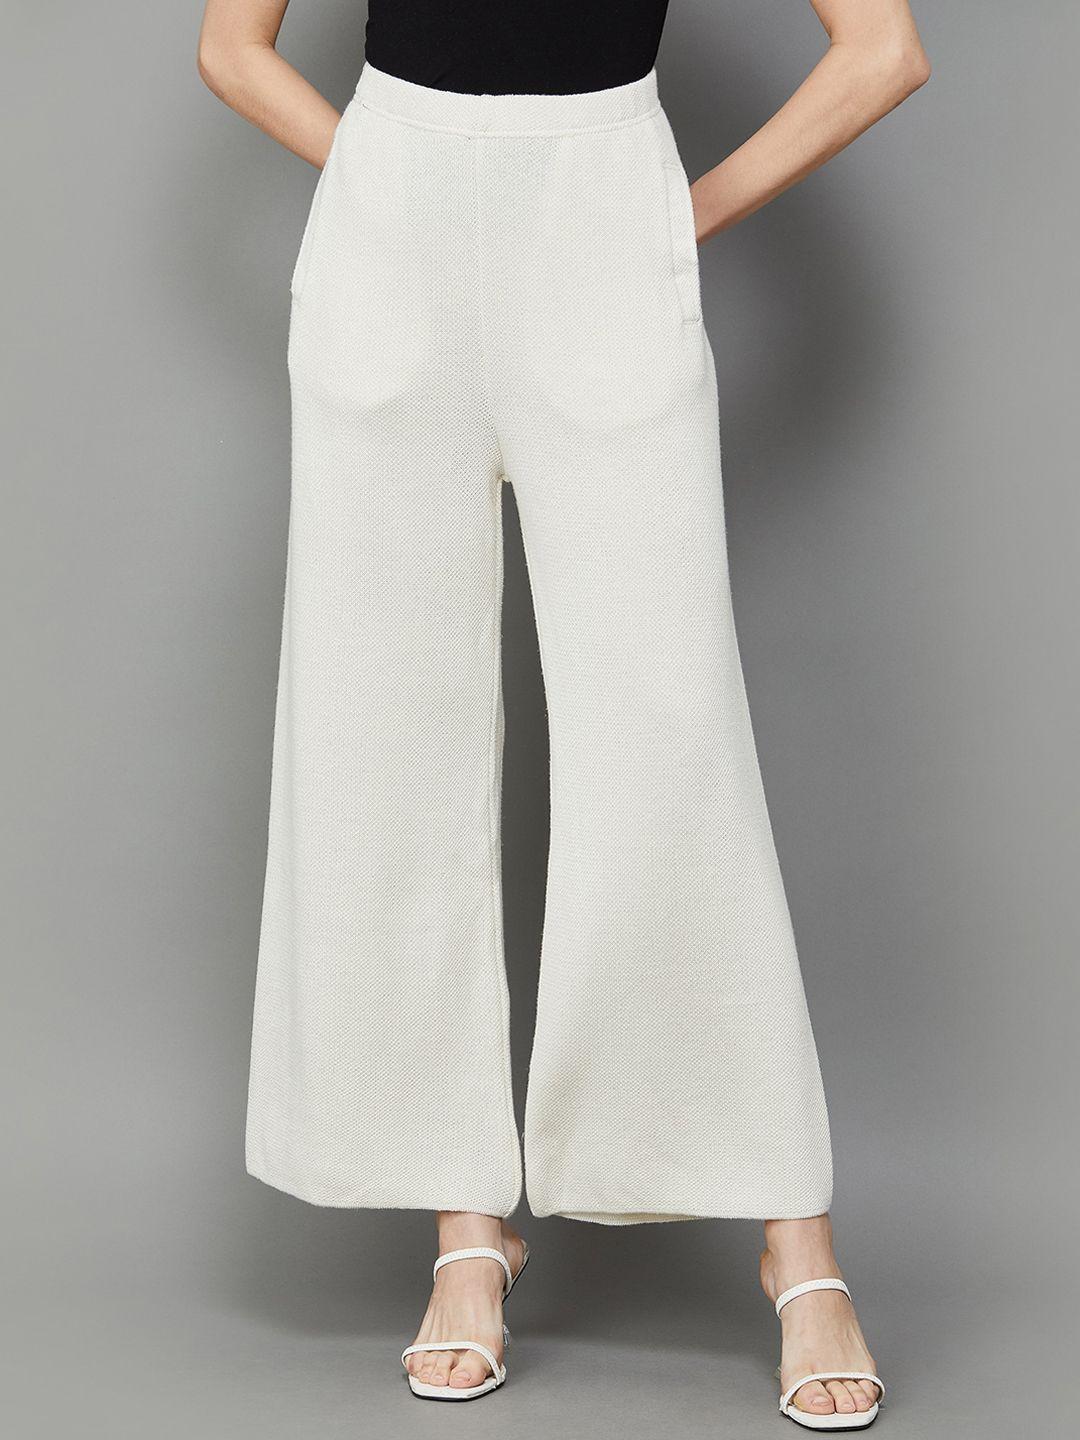 melange-by-lifestyle-women-acrylic-parallel-trousers